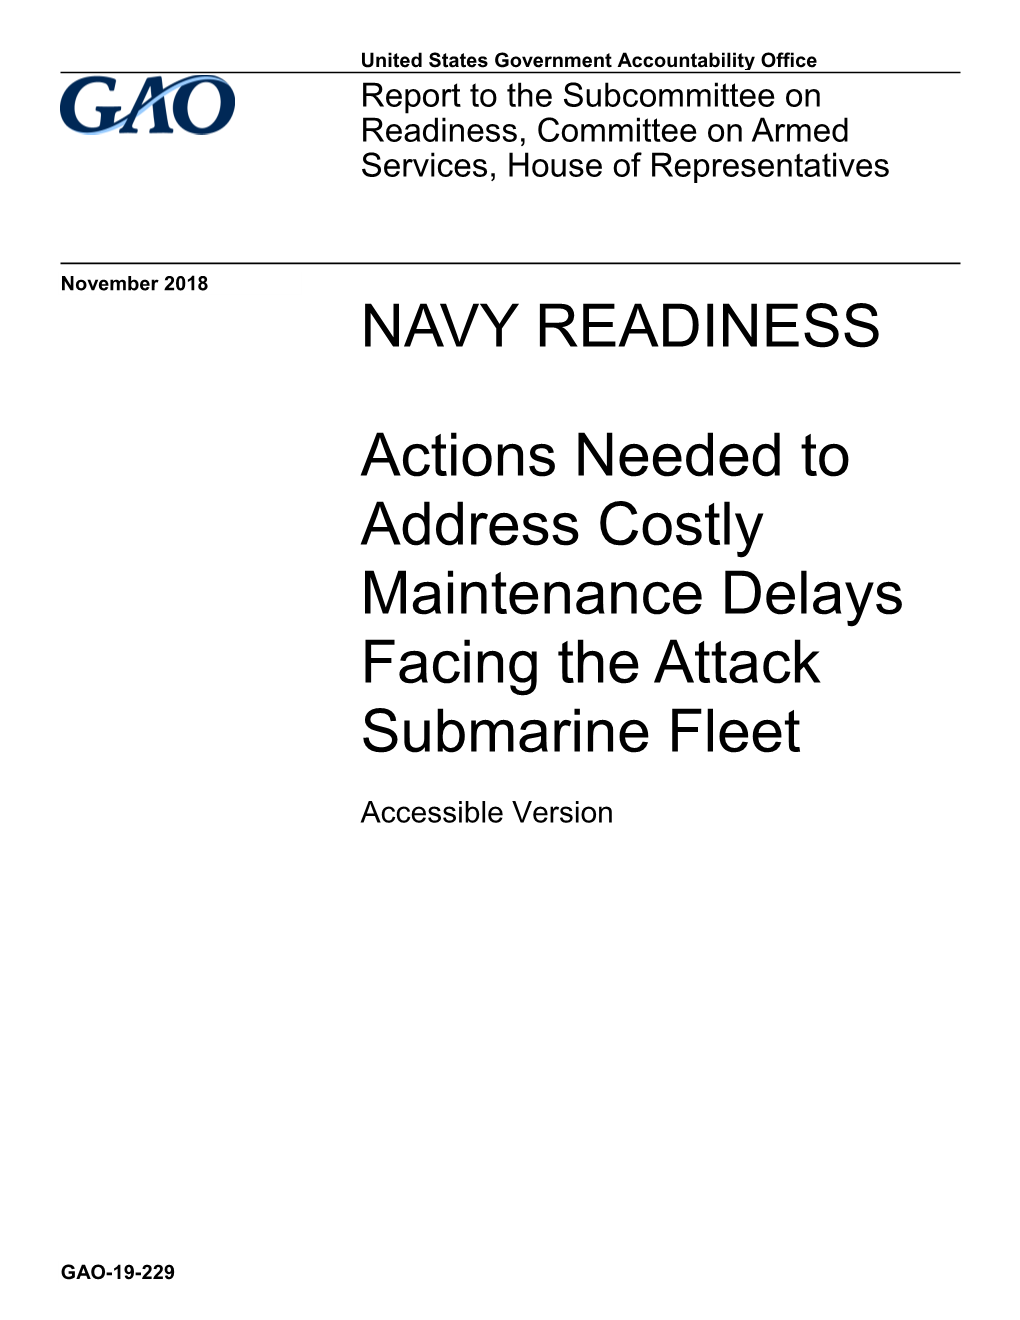 NAVY READINESS Actions Needed to Address Costly Maintenance Delays Facing the Attack Submarine Fleet